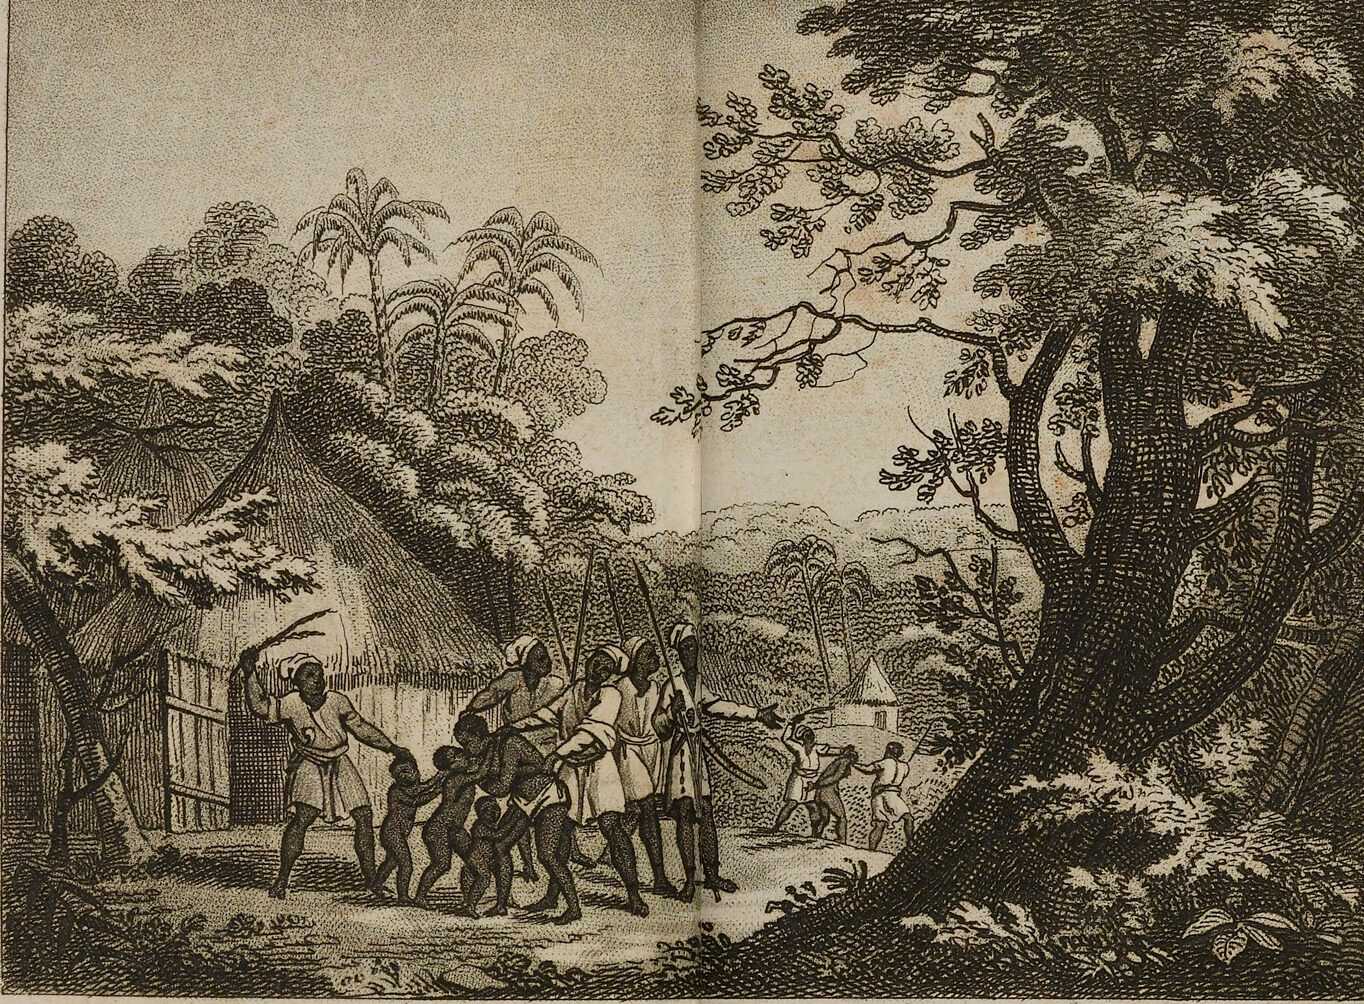 Illustration of Africans being taken by traders